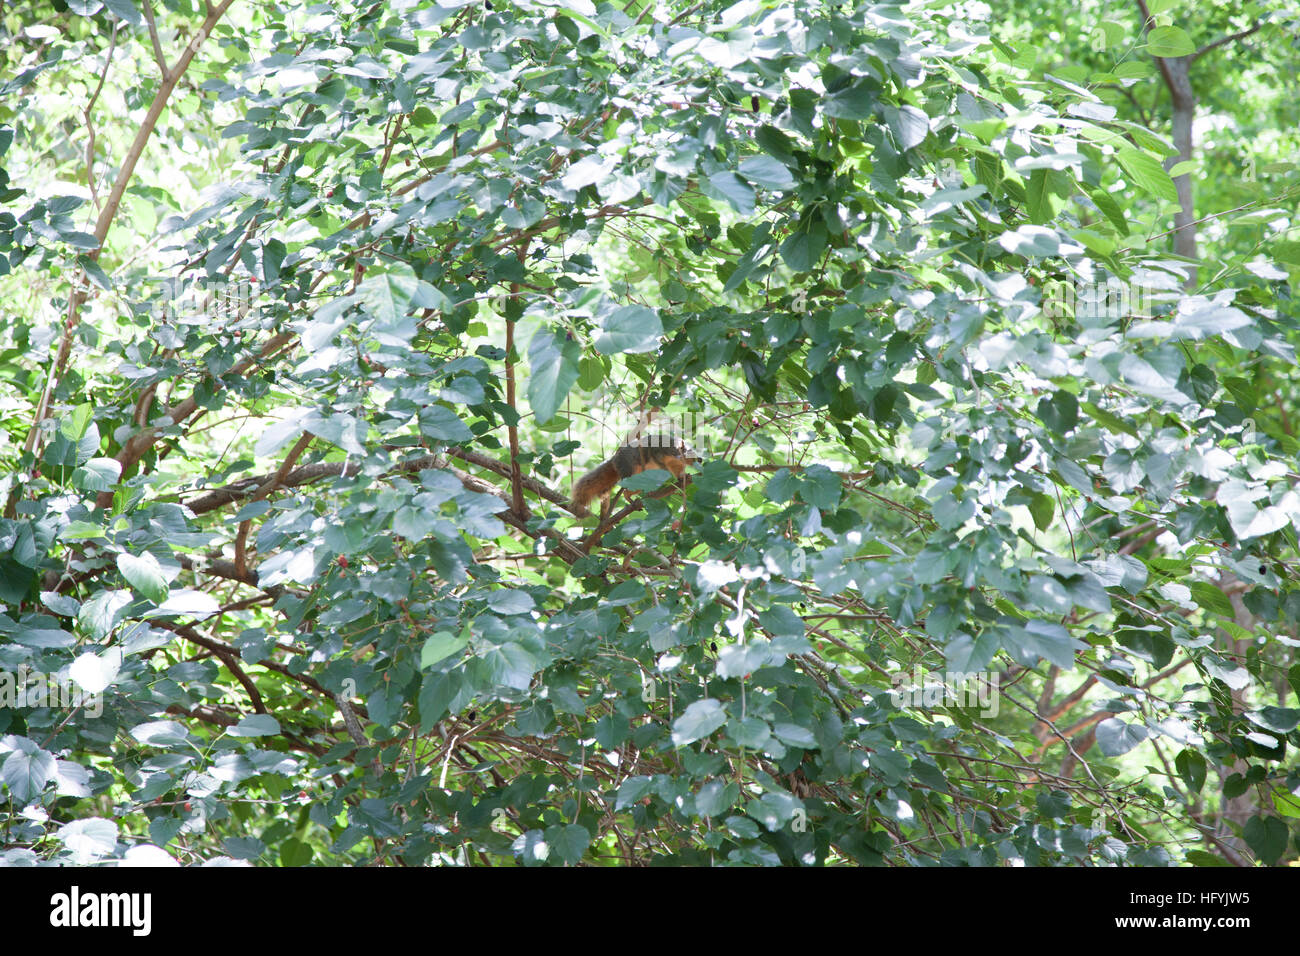 Squirrel hiding on a tree branch Stock Photo